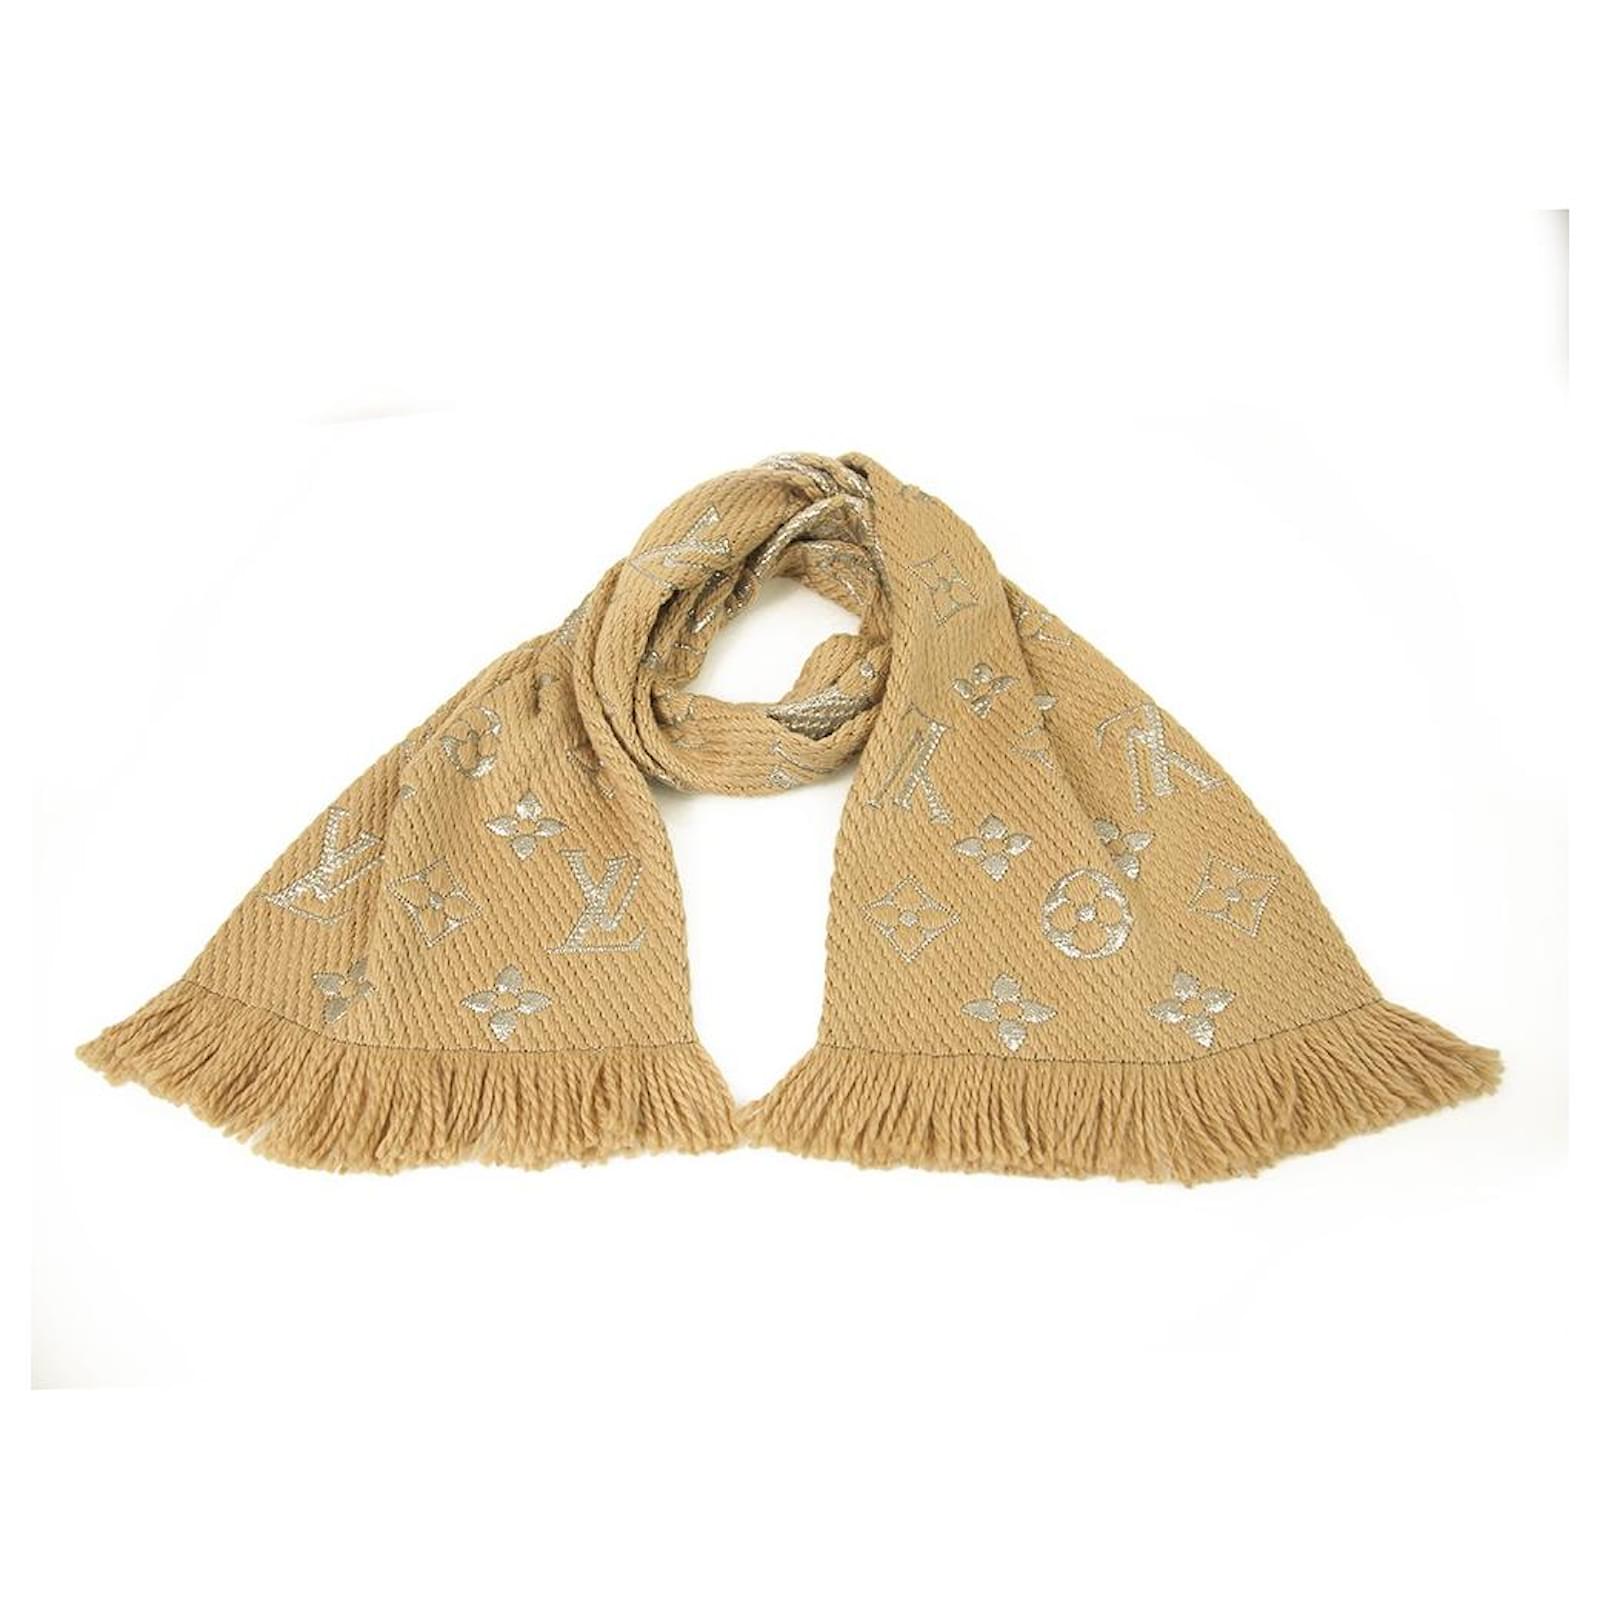 Louis Vuitton - Authenticated Logomania Scarf - Wool Silver for Women, Very Good Condition